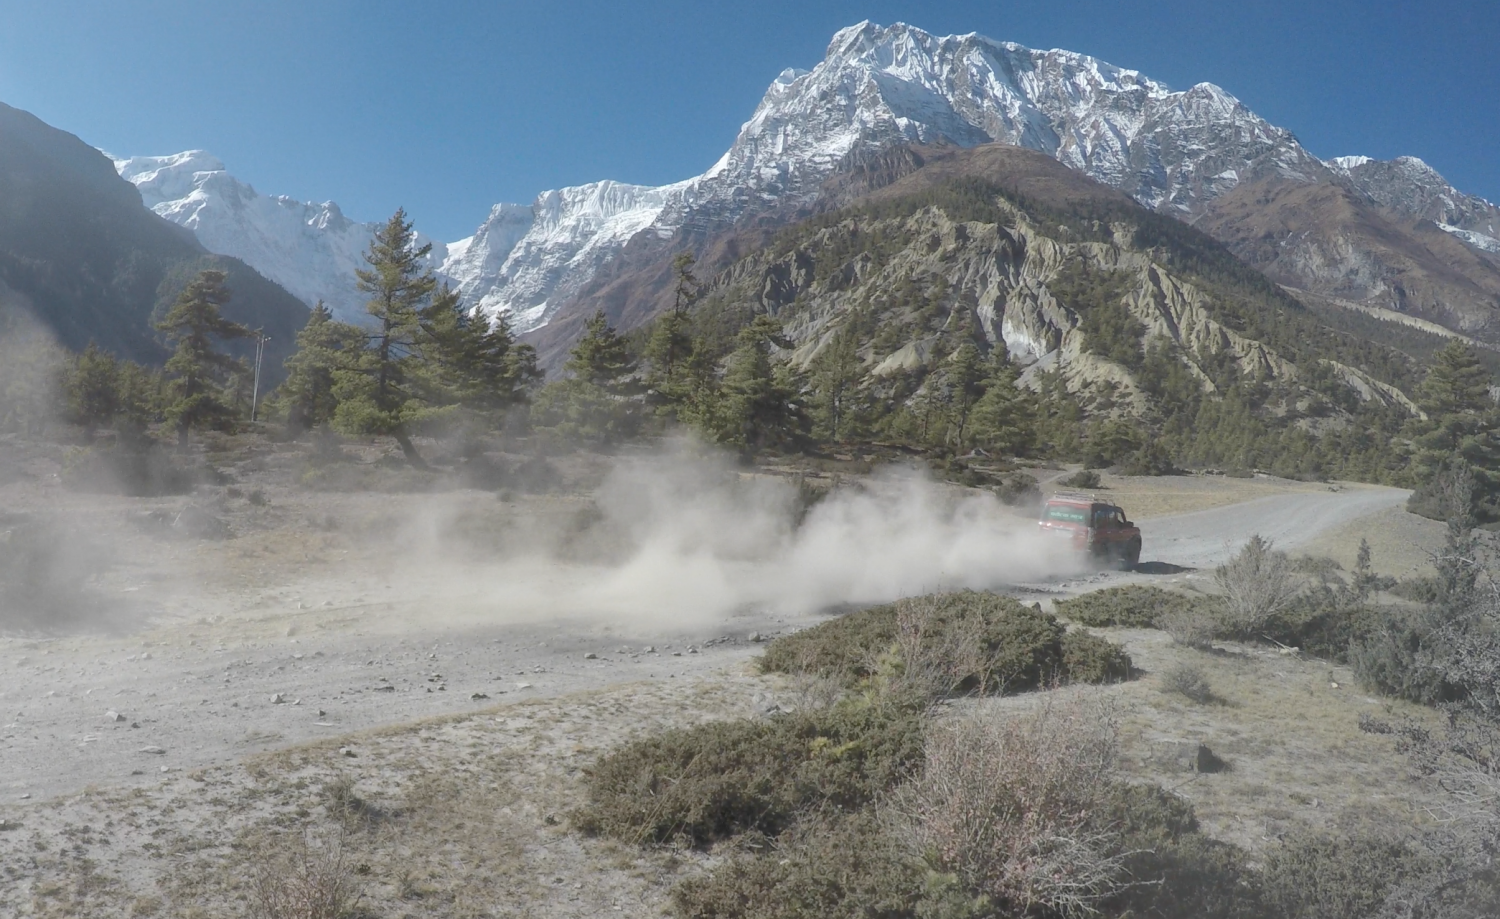 A 4x4 jeep picks up dust as it rips through the valley of the Himalayas on a Himalayan Life Adventures trip